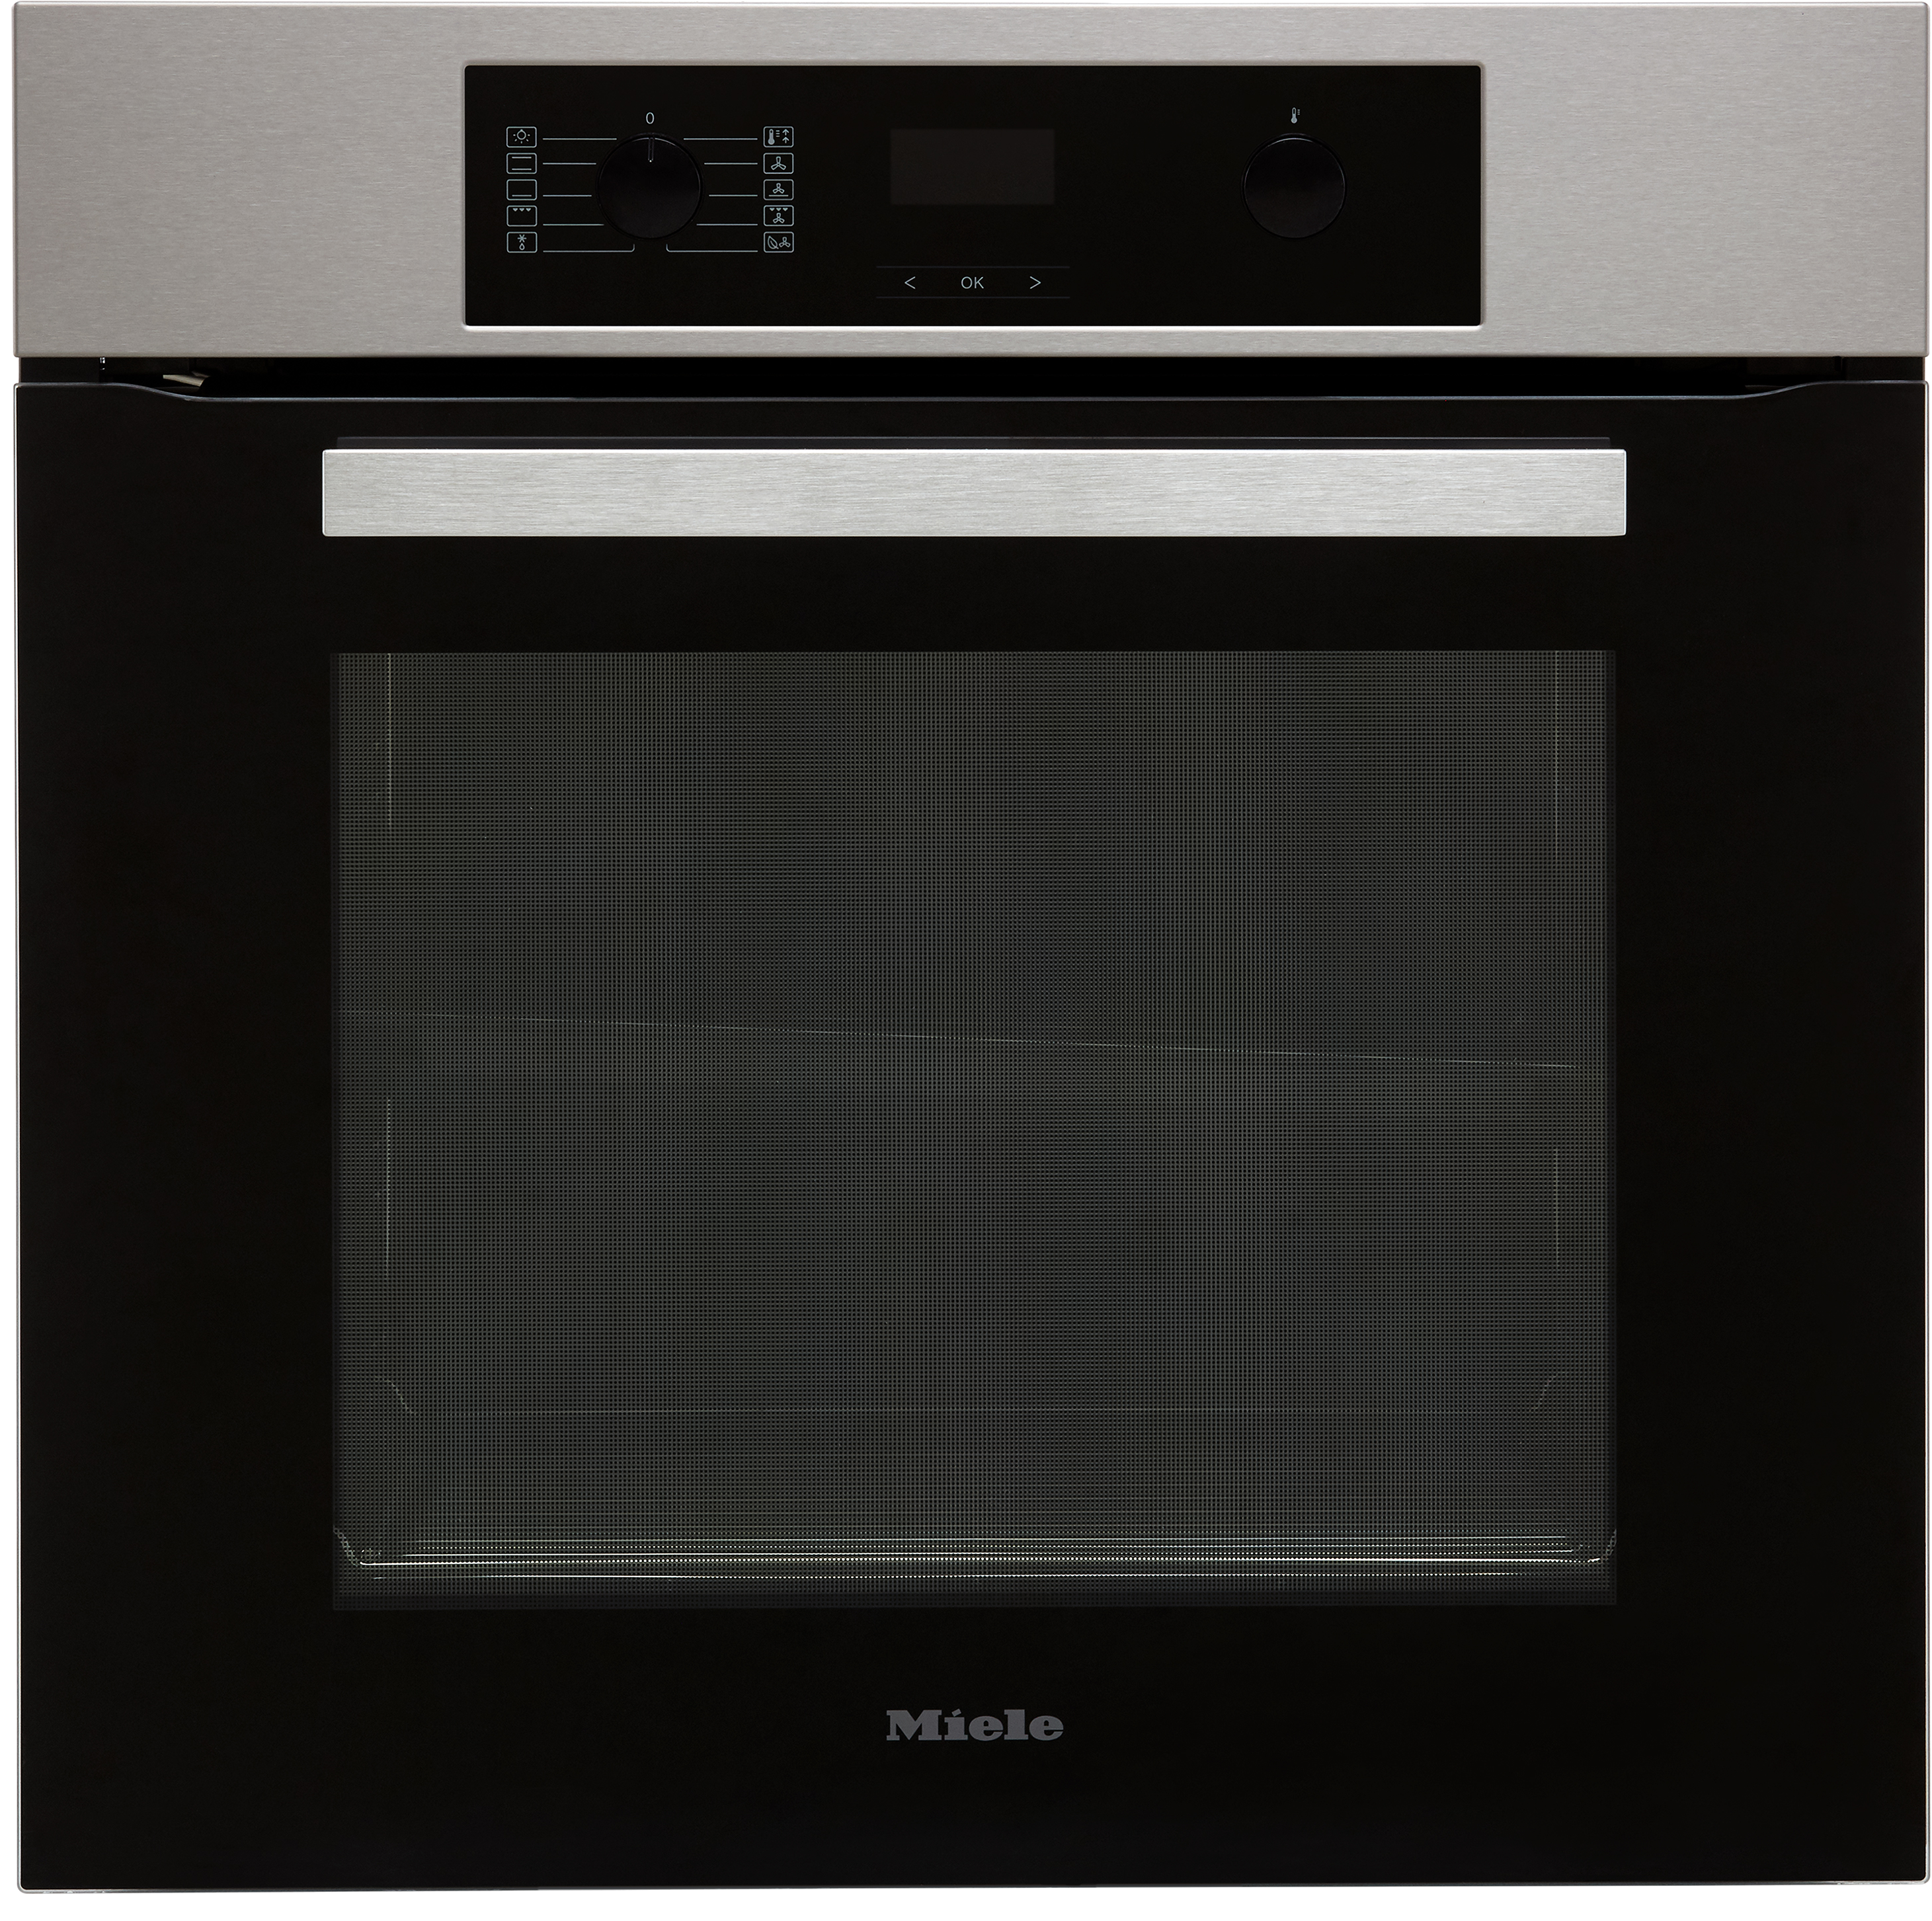 Miele H2265-1B Built In Electric Single Oven - Clean Steel - A+ Rated, Stainless Steel